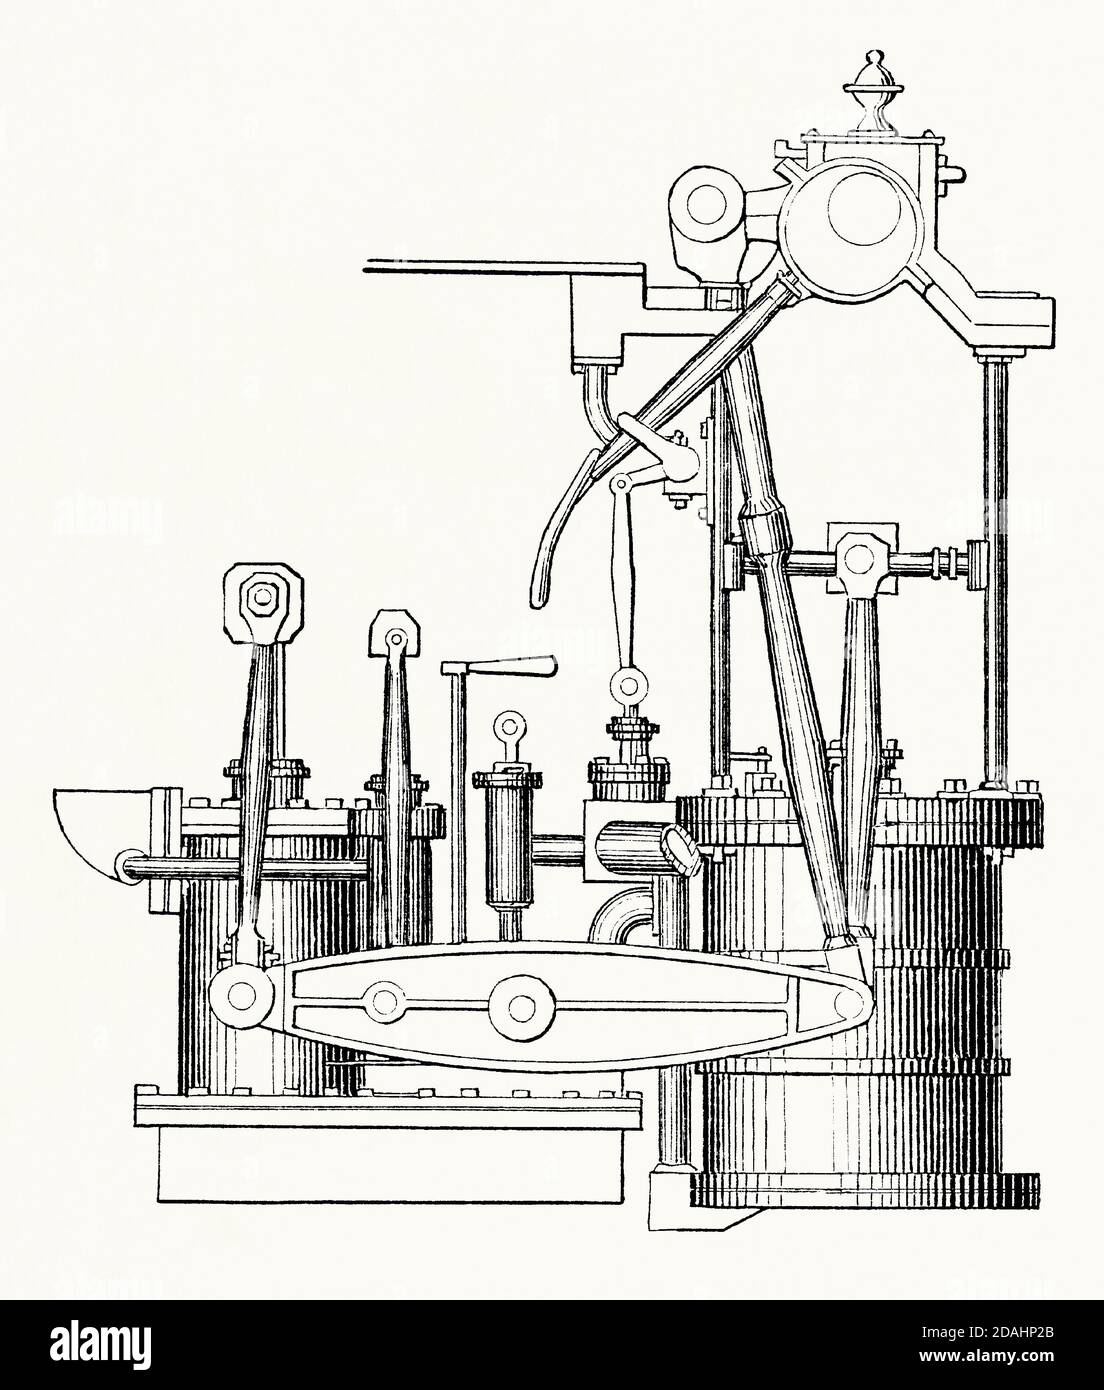 An old engraving of Napier’s direct-action steam engine. It is from a Victorian mechanical engineering book of the 1880s. Direct action means that power was directed to the crankshaft via the piston rod and/or connecting rod. Direct-acting engines had the advantage of being smaller and less heavy than beam or side-lever engines but they were more prone to wear and tear and thus required more maintenance. Robert Napier (1791–1876) was a Scottish marine engineer. From his works in Govan, Glasgow, Scotland, UK, Napier built marine engines. Stock Photo